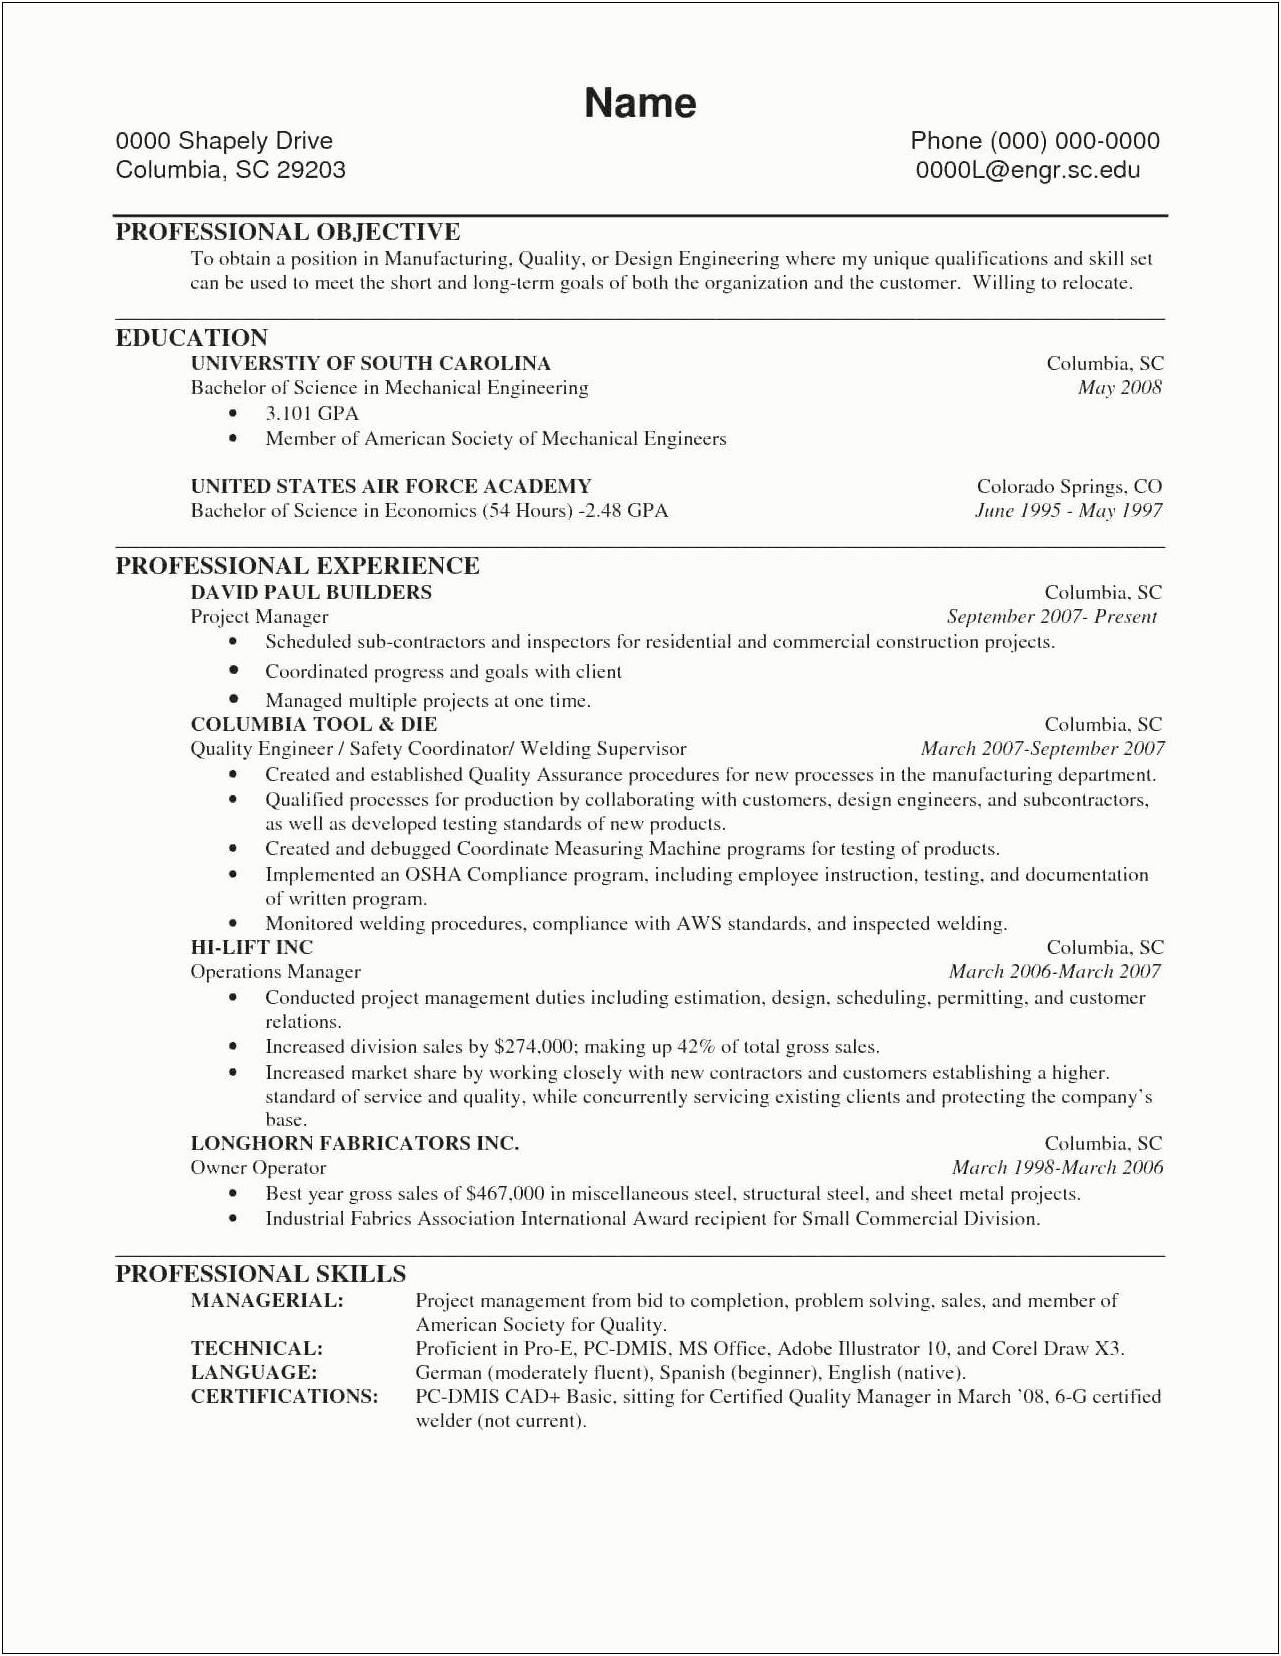 Air Force Academy Resume Example